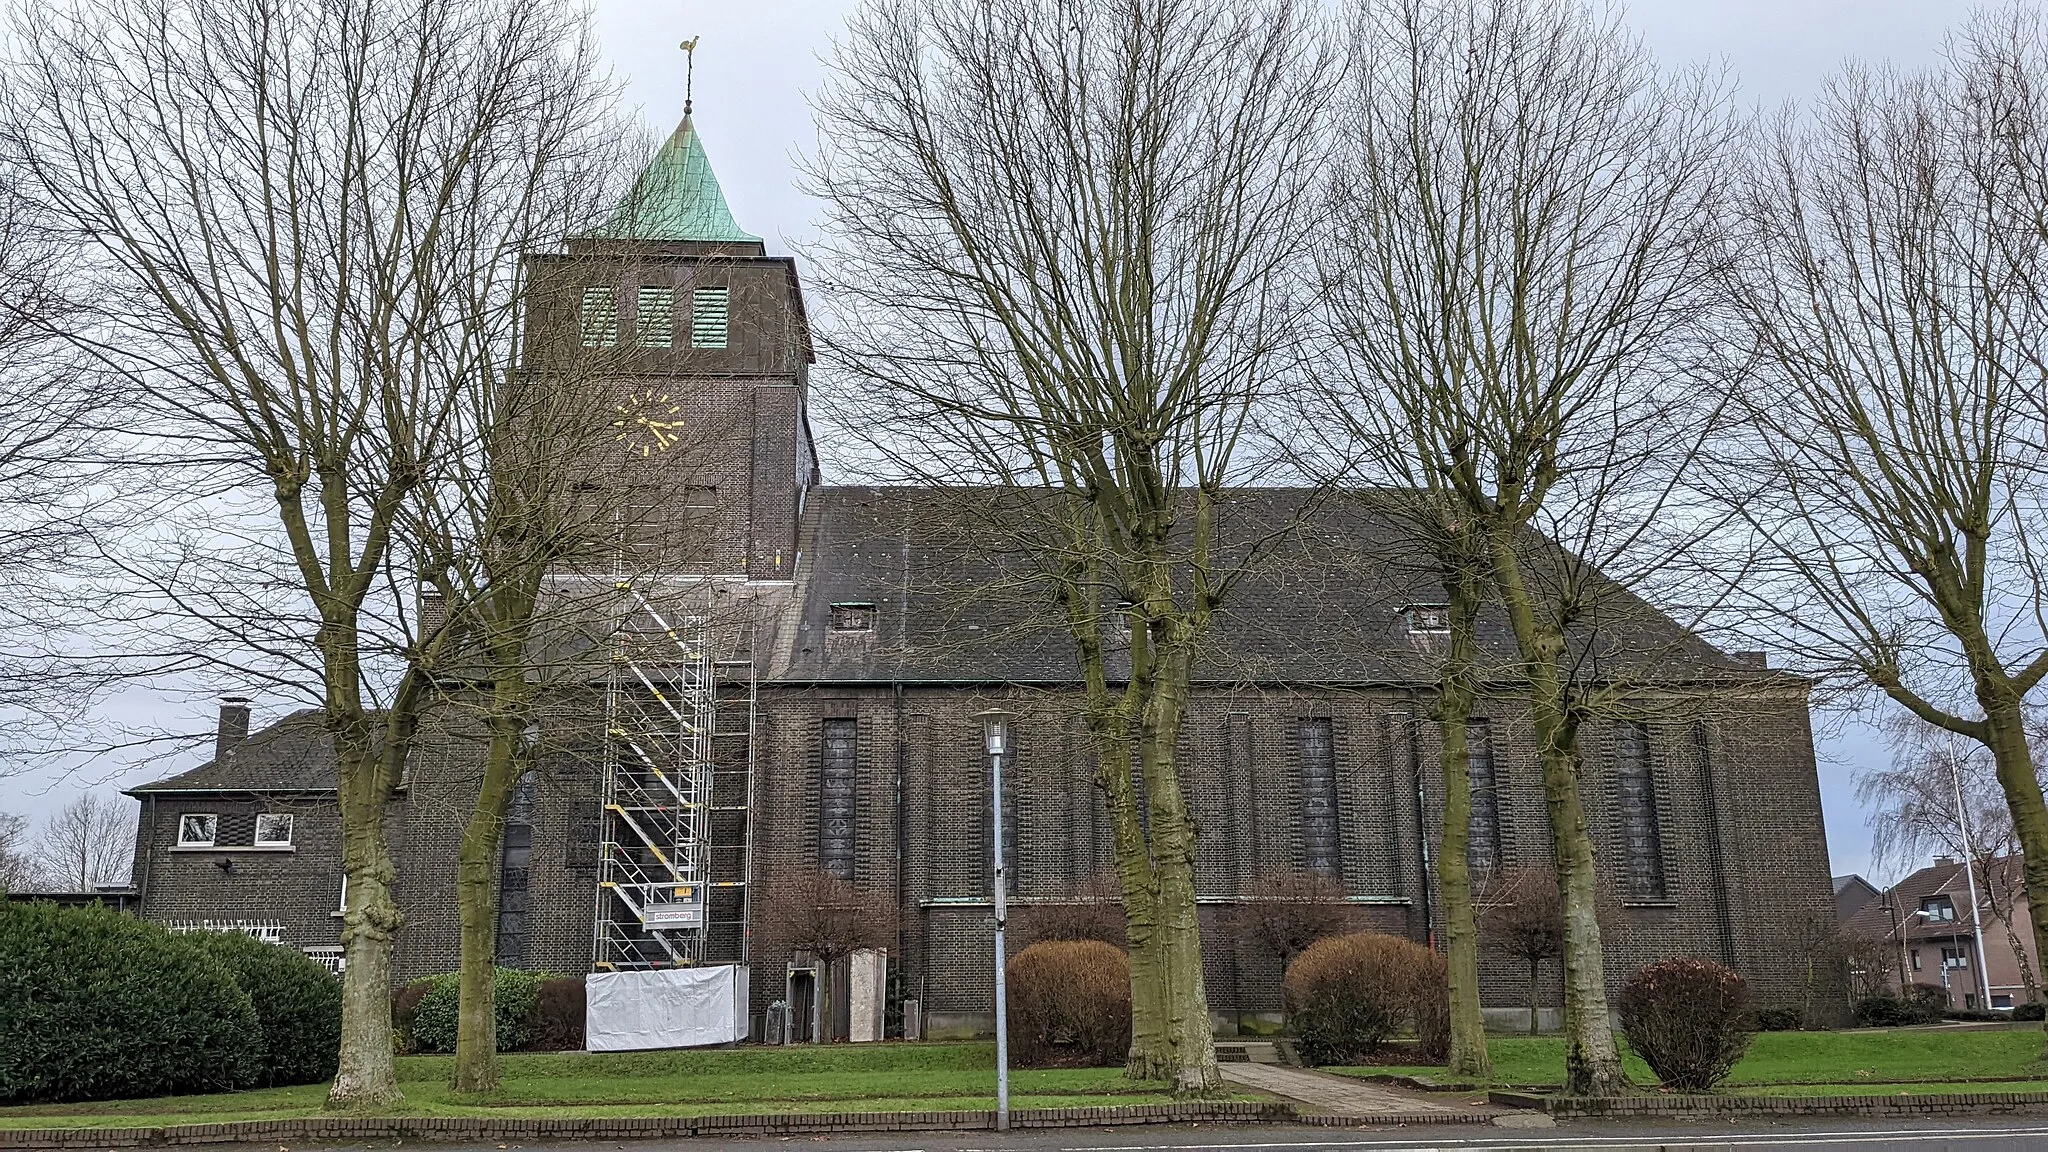 Photo showing: View of the north side of the Catholic Church of St. Ludgerus on Birkenstraße in Bottrop-Fuhlenbrock, which was built in 1927-29 to designs by Josef Franke